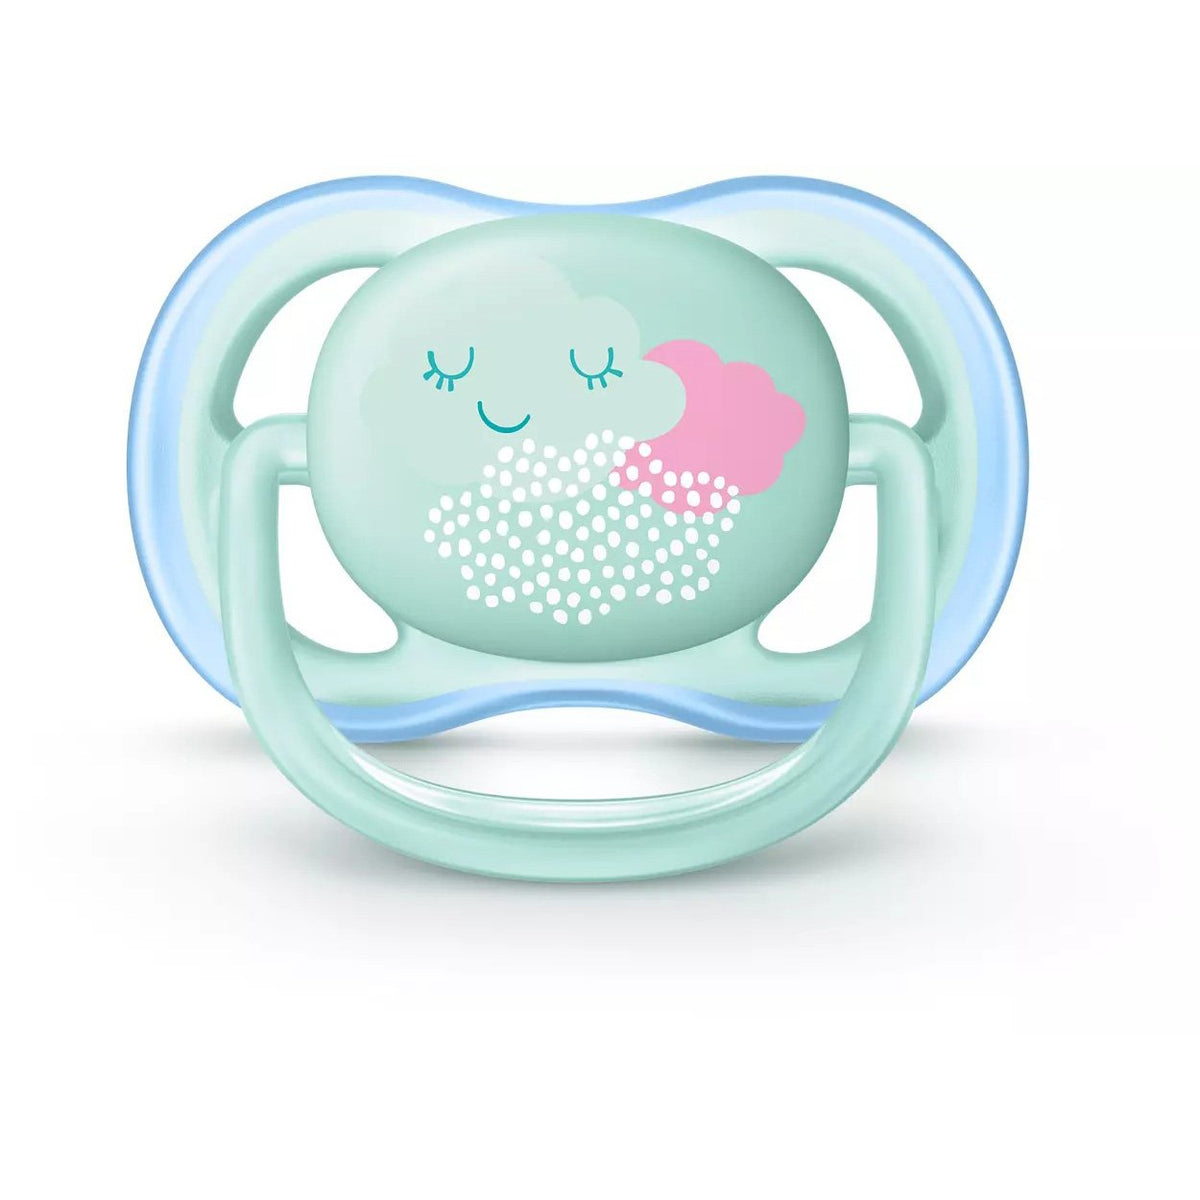 philips-avent-ultra-air-pacifier- (3)